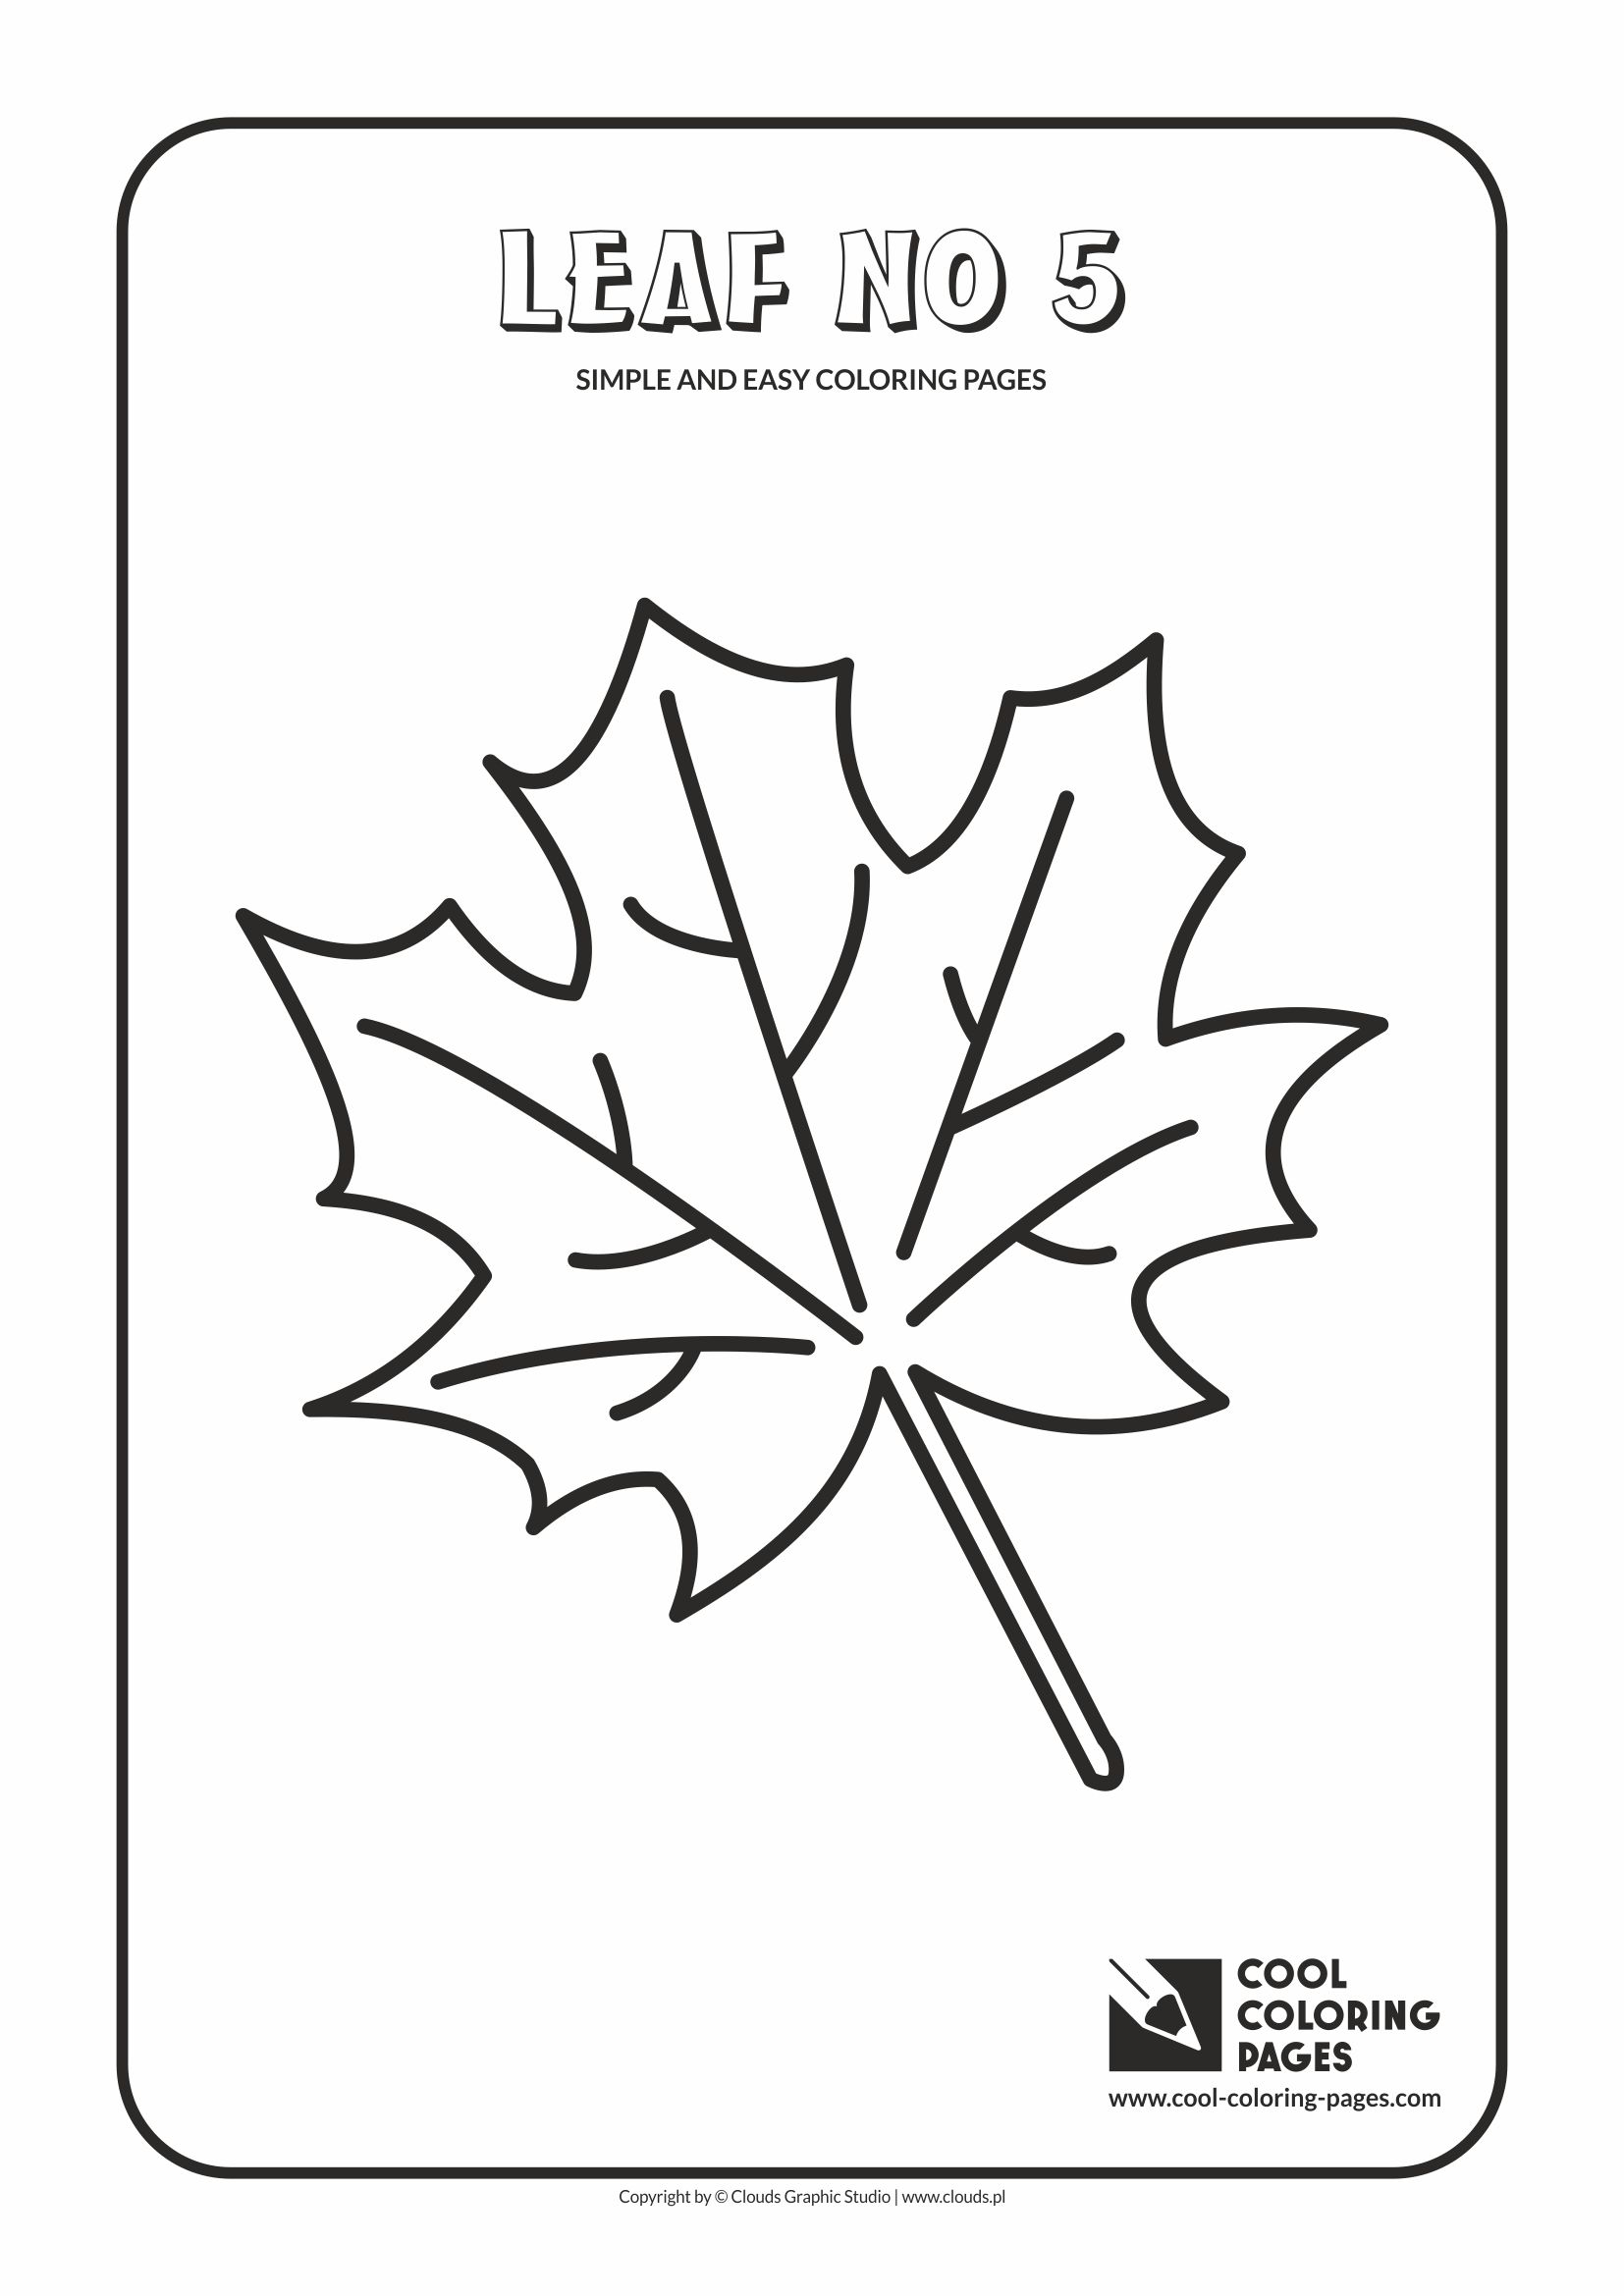 Simple and easy coloring pages for toddlers - Leaf no 5